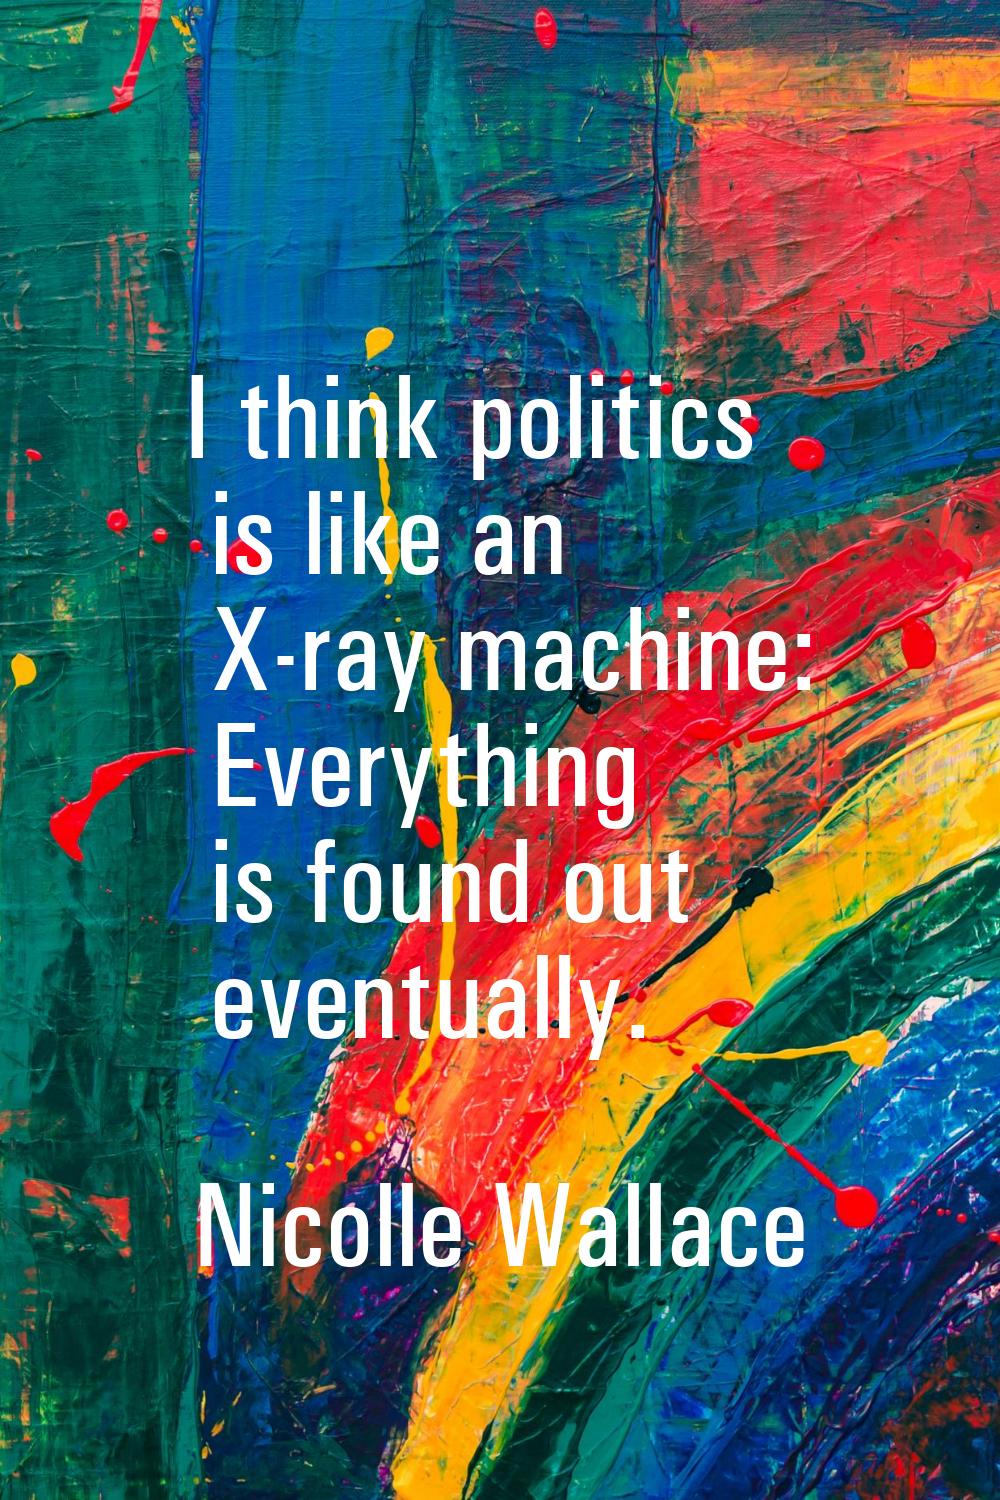 I think politics is like an X-ray machine: Everything is found out eventually.